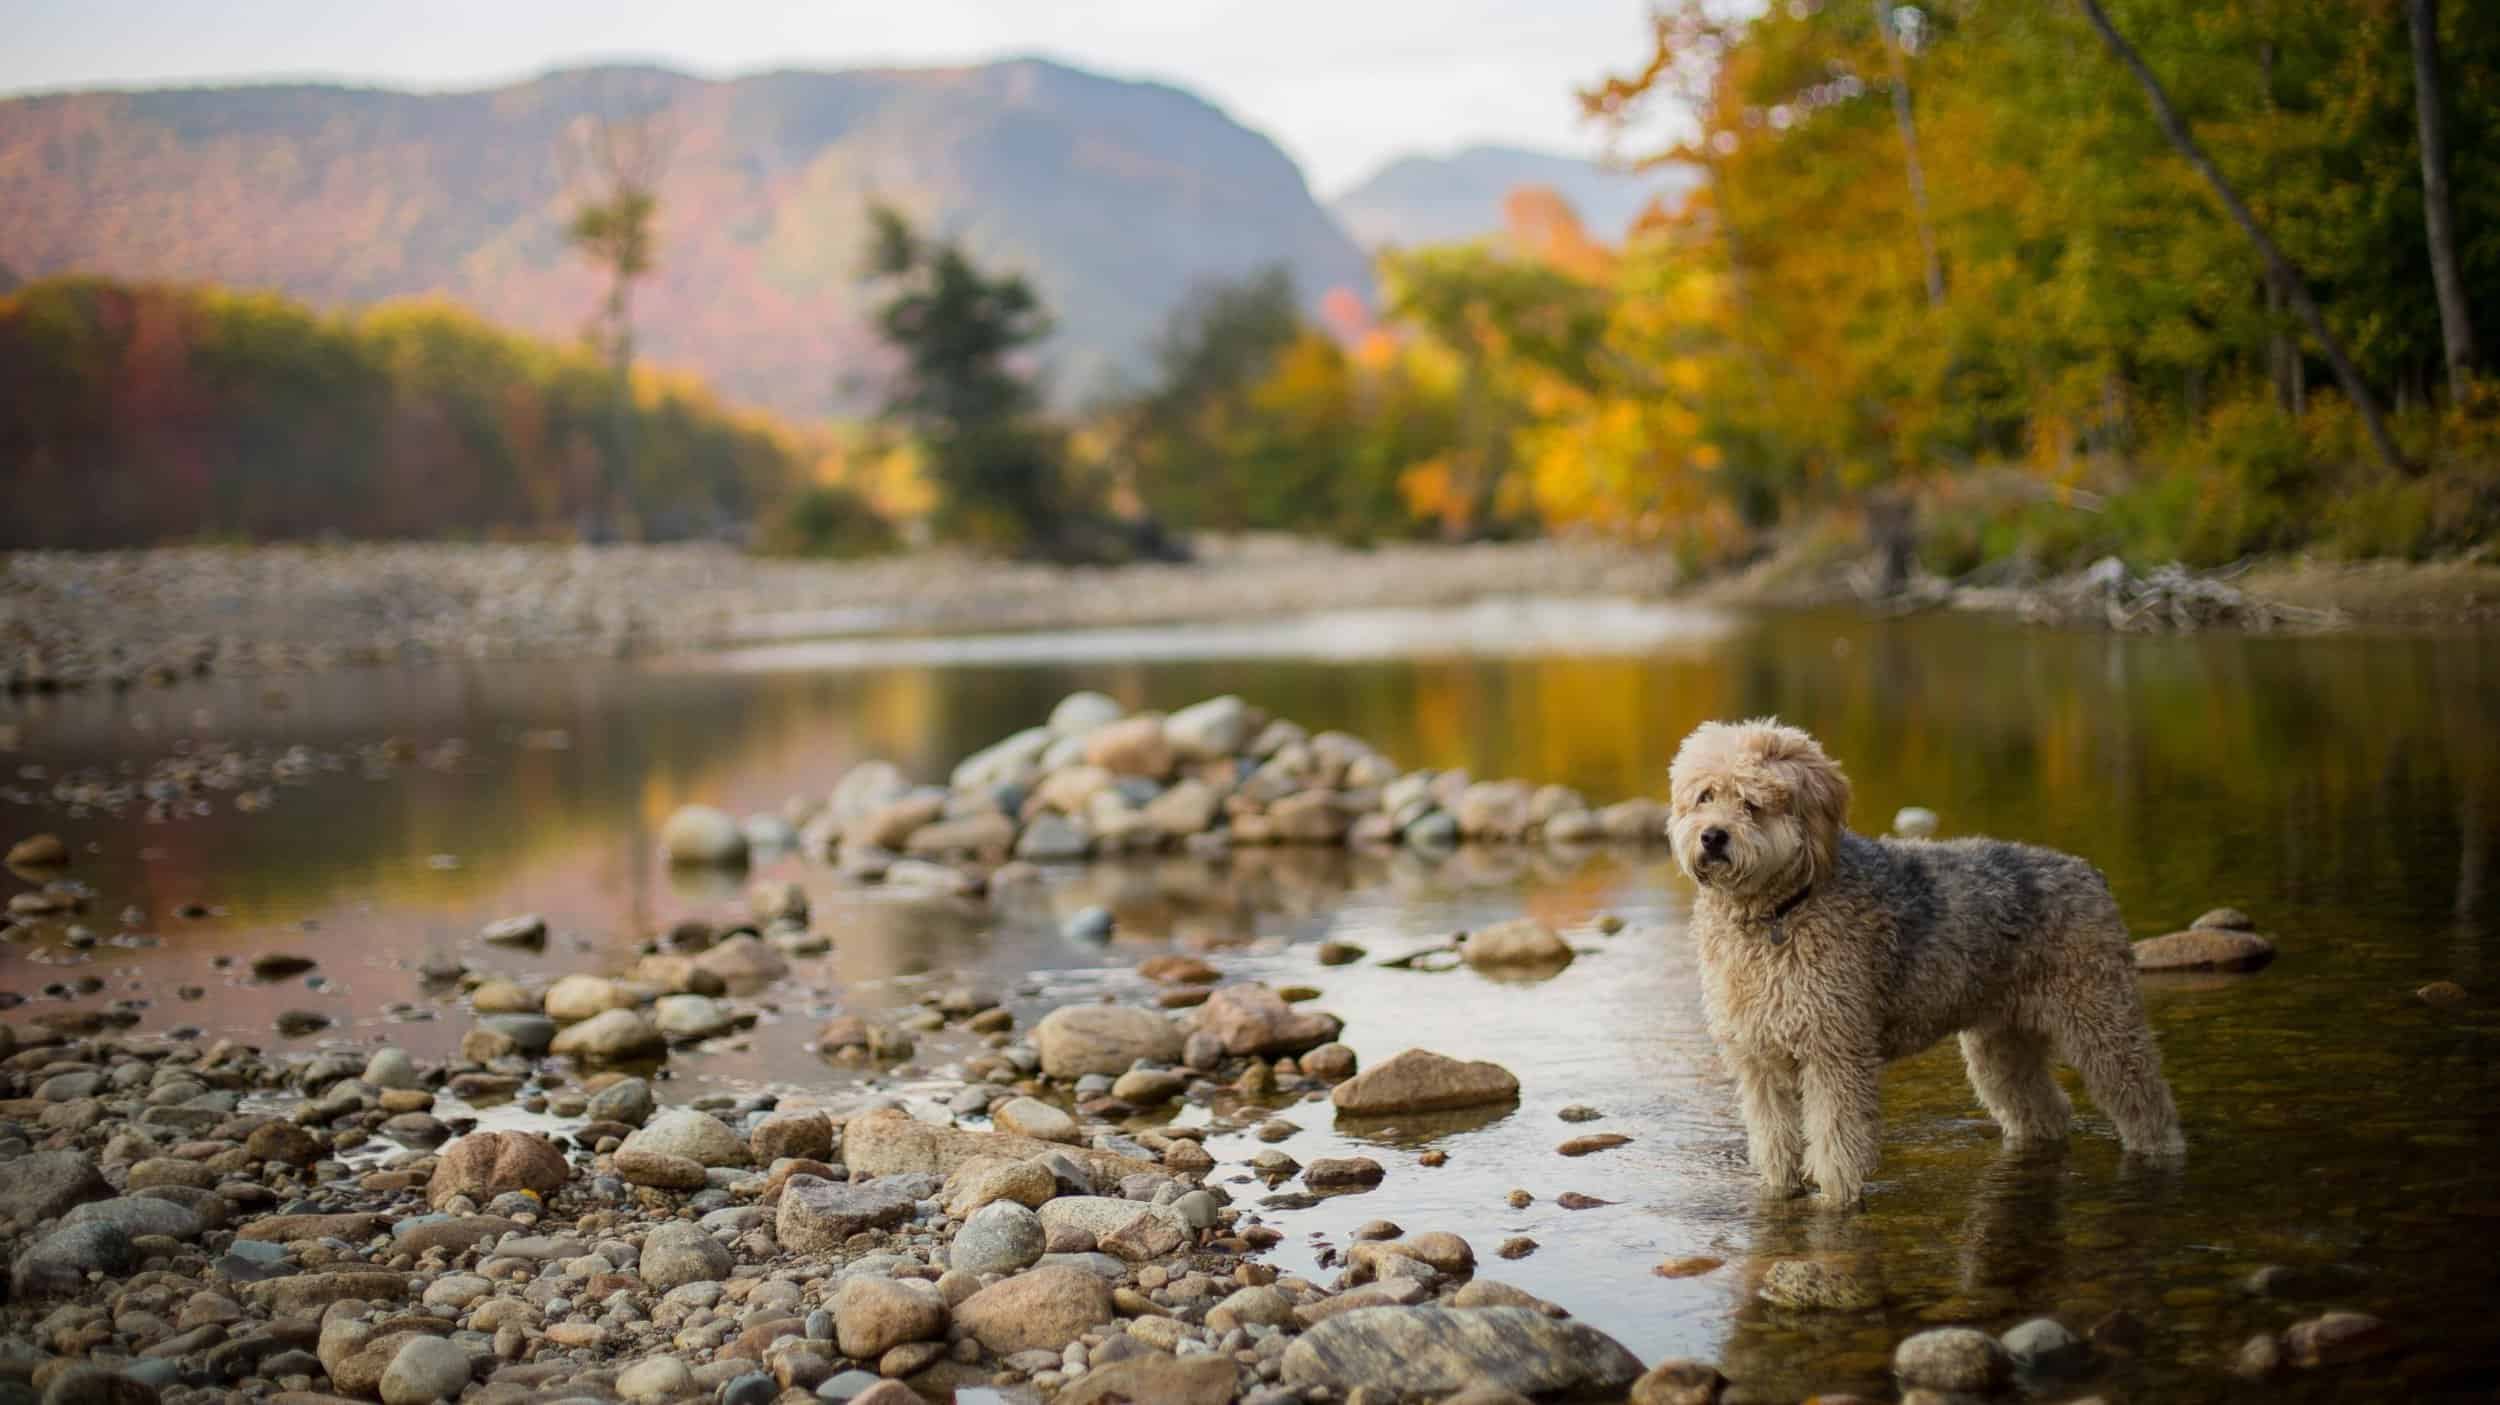 dog stands in shallow water of river bank